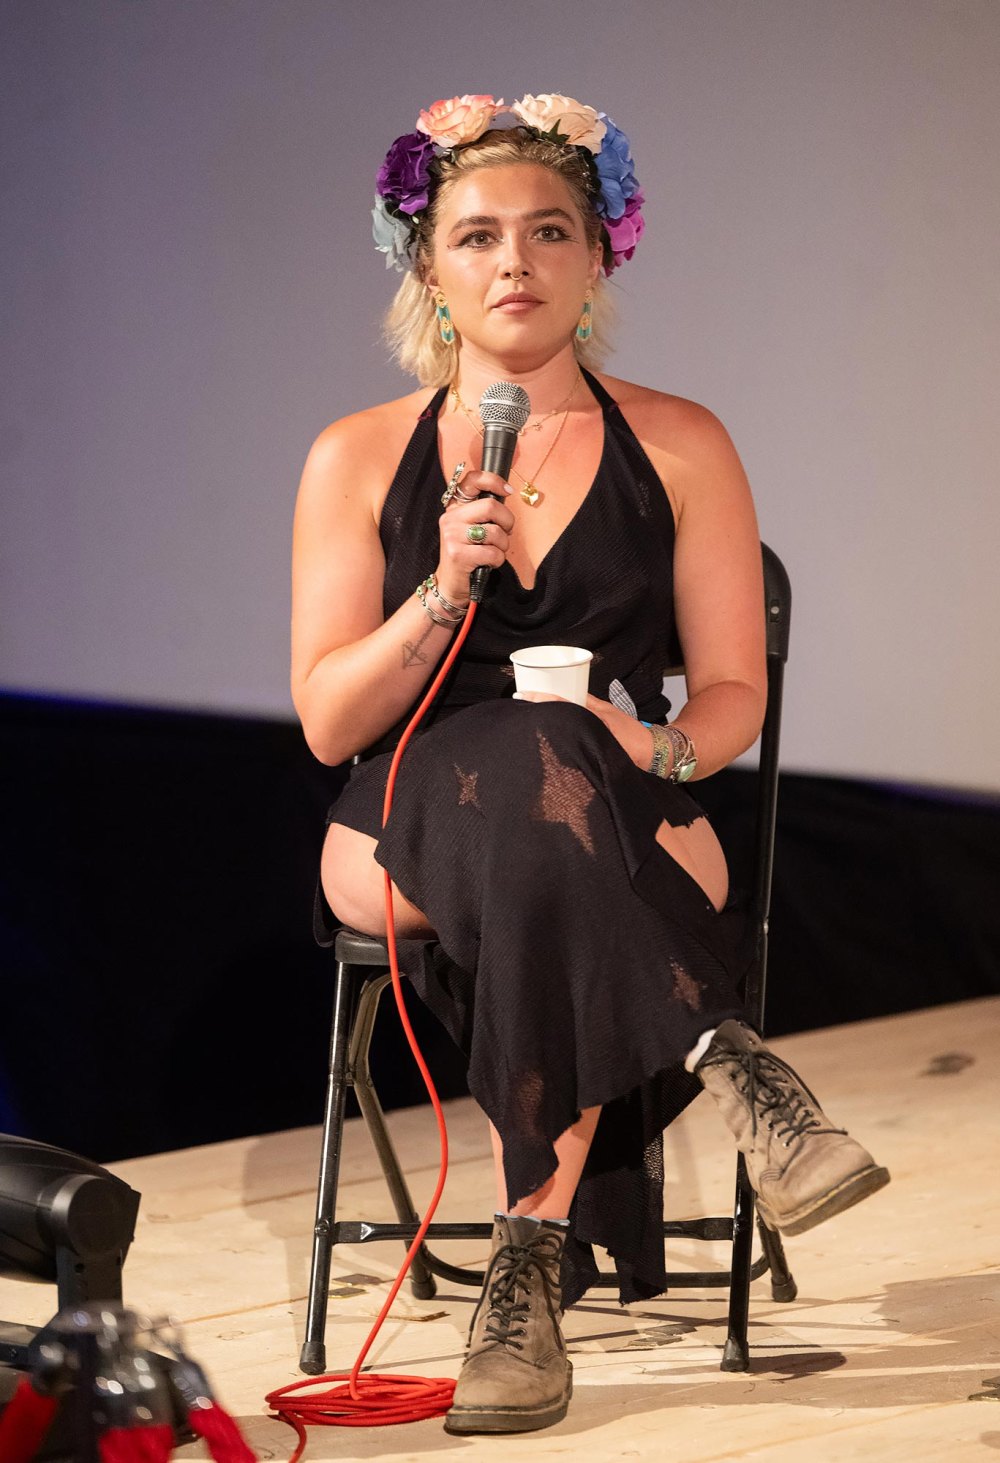 Florence Pugh Channels Her ‘Midsommar’ Film in Colorful Flower Crown at Glastonbury Q&A